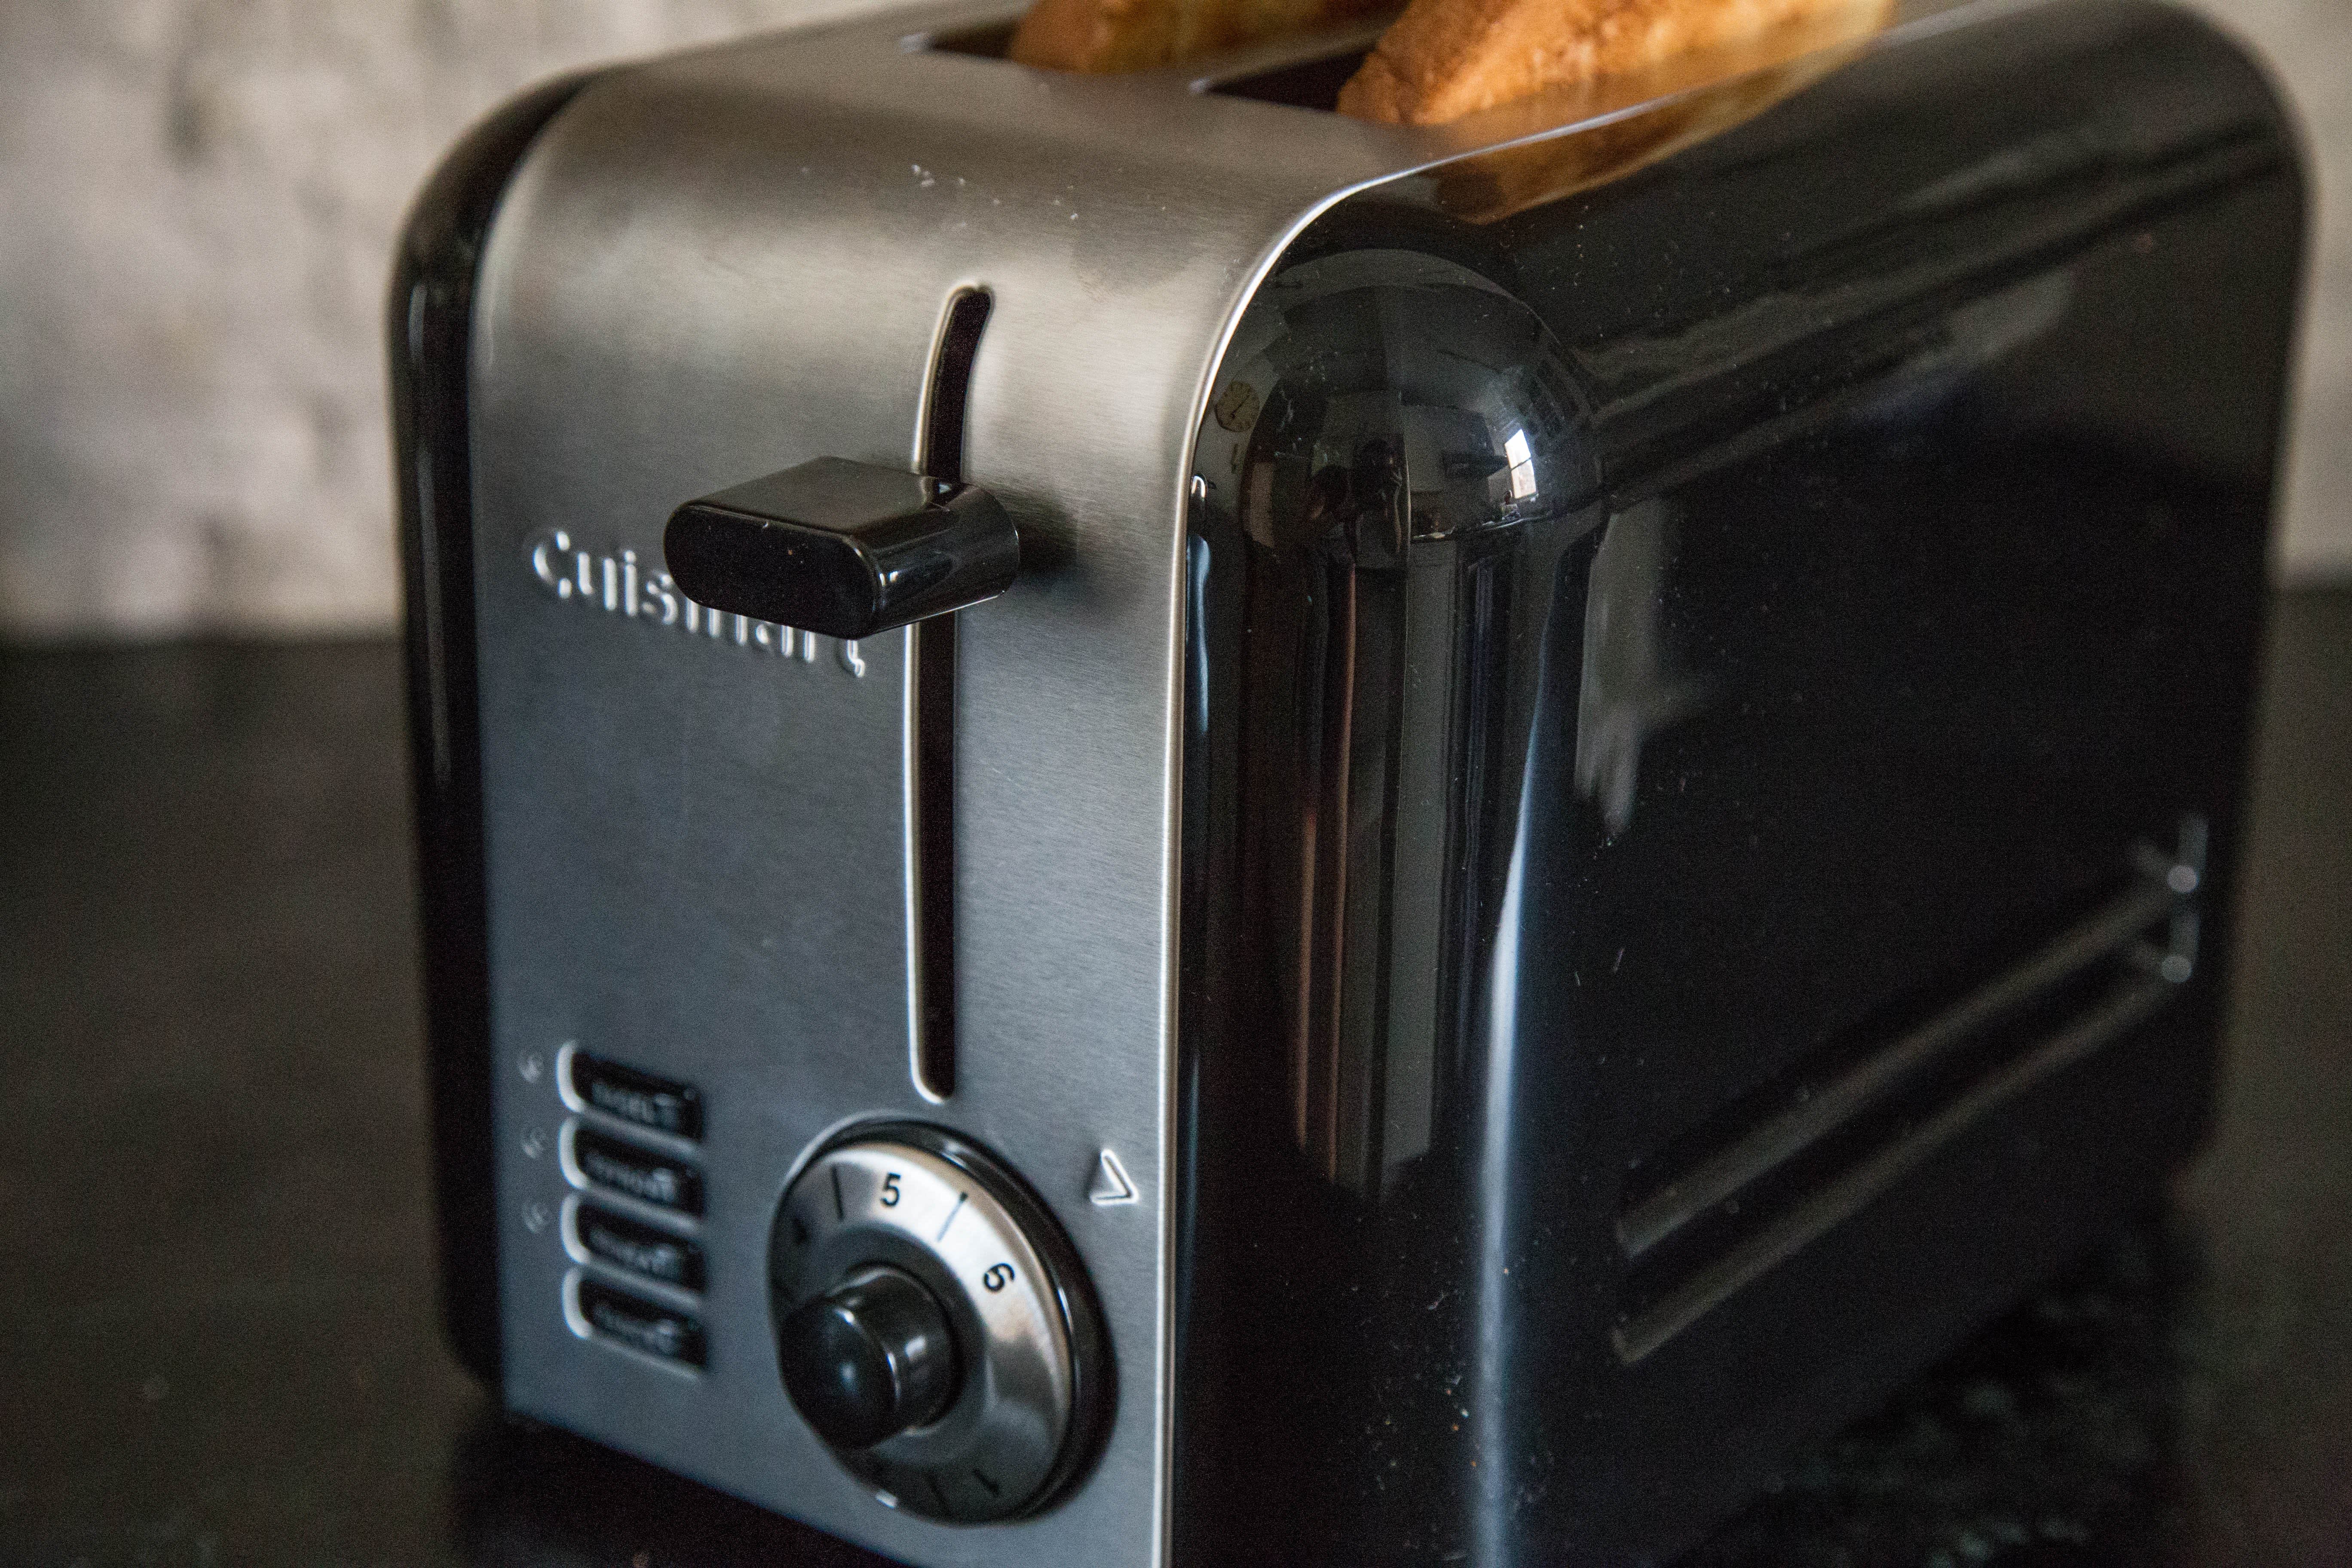 Best Buy: Cuisinart 2 Slice Compact Stainless Toaster Black/Stainless  CPT-320P1